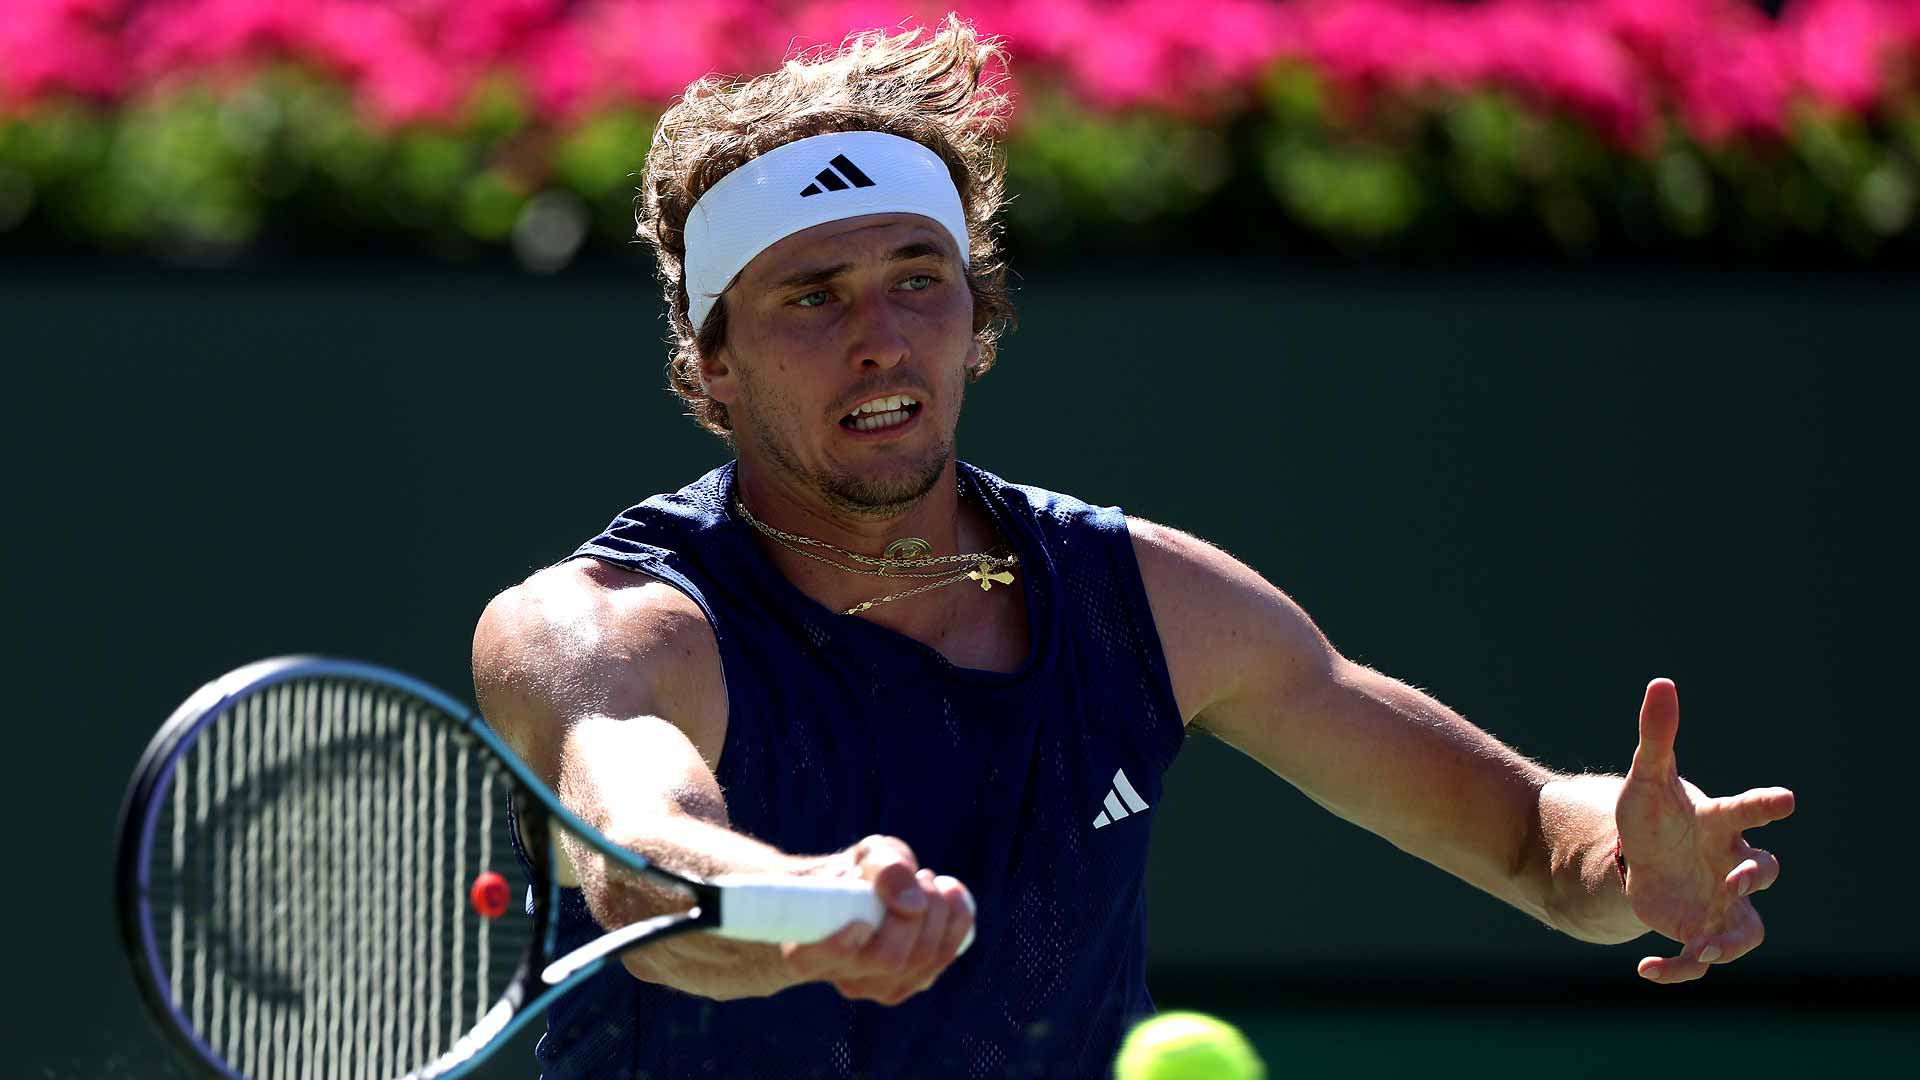 Zverev Holds Nerve For Ruusuvuori Win In Indian Wells ATP Tour Tennis